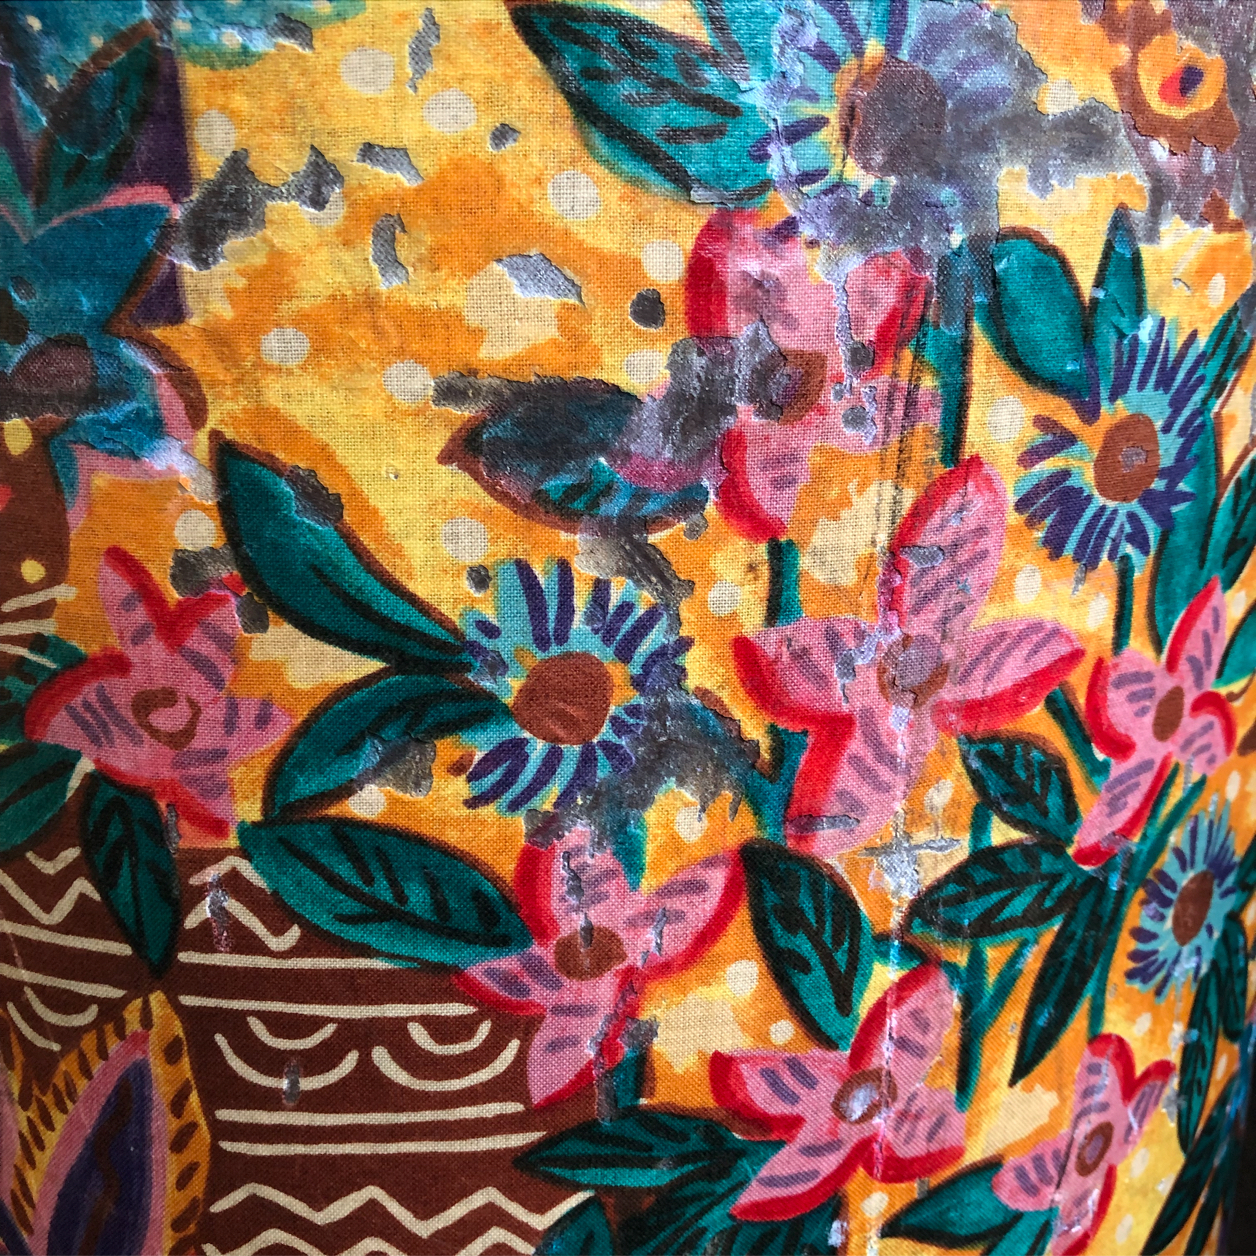 the side of a brightly painted drum